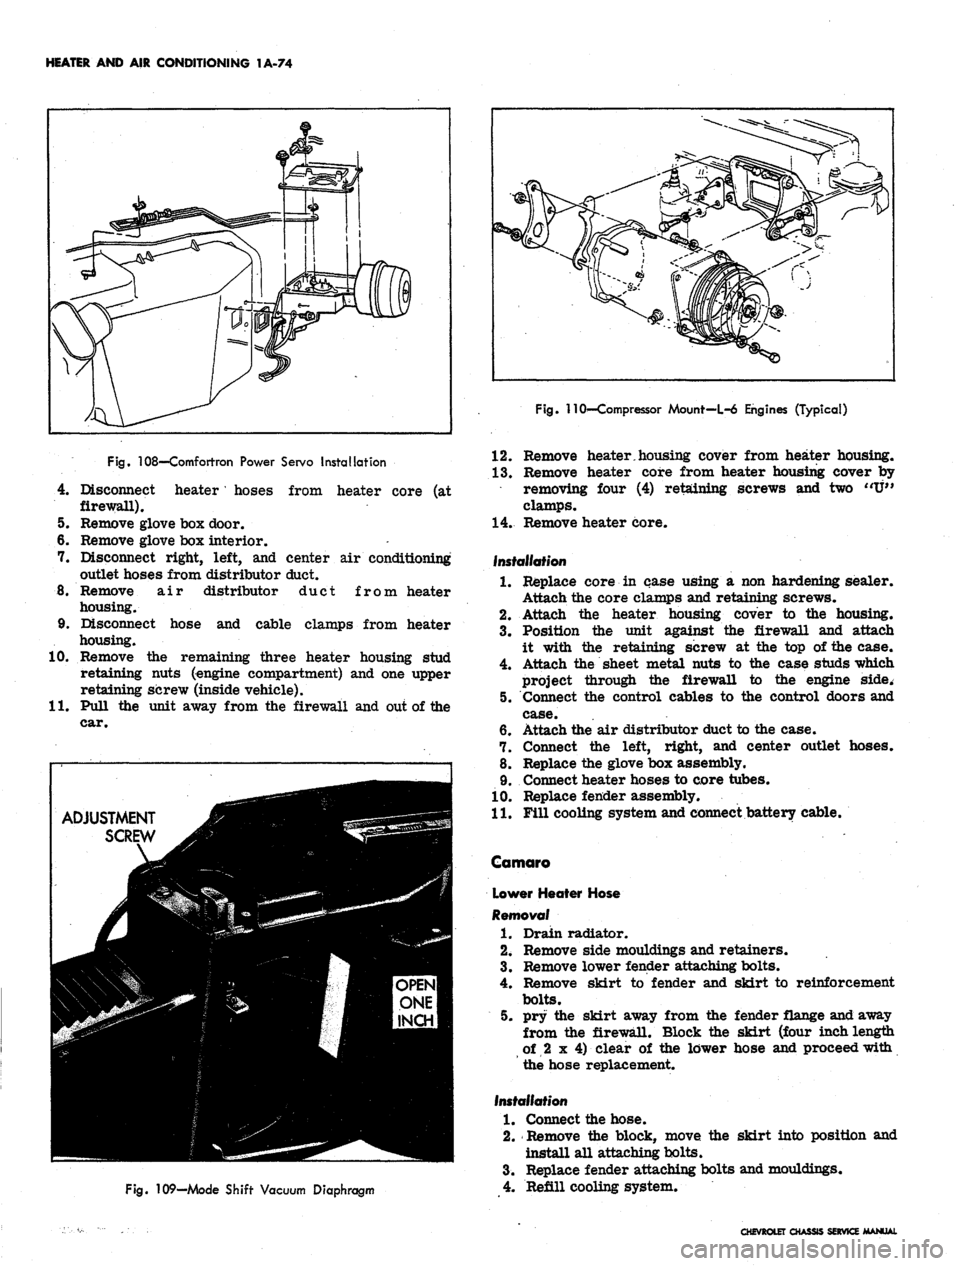 CHEVROLET CAMARO 1967 1.G Chassis Service Manual 
HEATER AND AIR CONDITIONING 1A-74

Fig.
 108—Comfortron Power Servo Installation

4.
 Disconnect heater hoses from heater core (at

firewall).

5. Remove glove box door.

6. Remove glove box inter